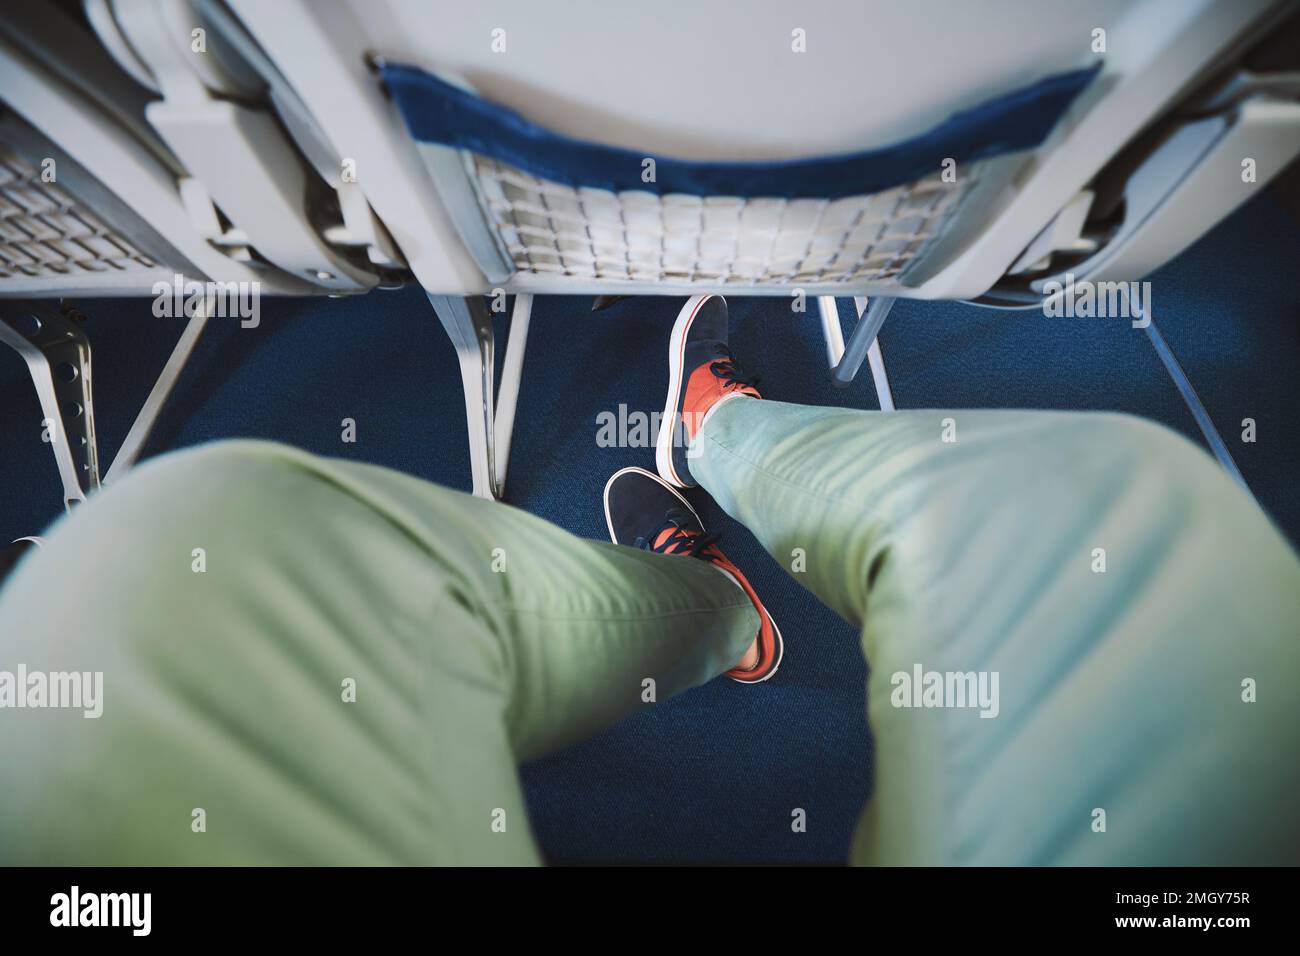 Personal perspective on legroom between seats in airplane. Man resting during flight. Stock Photo